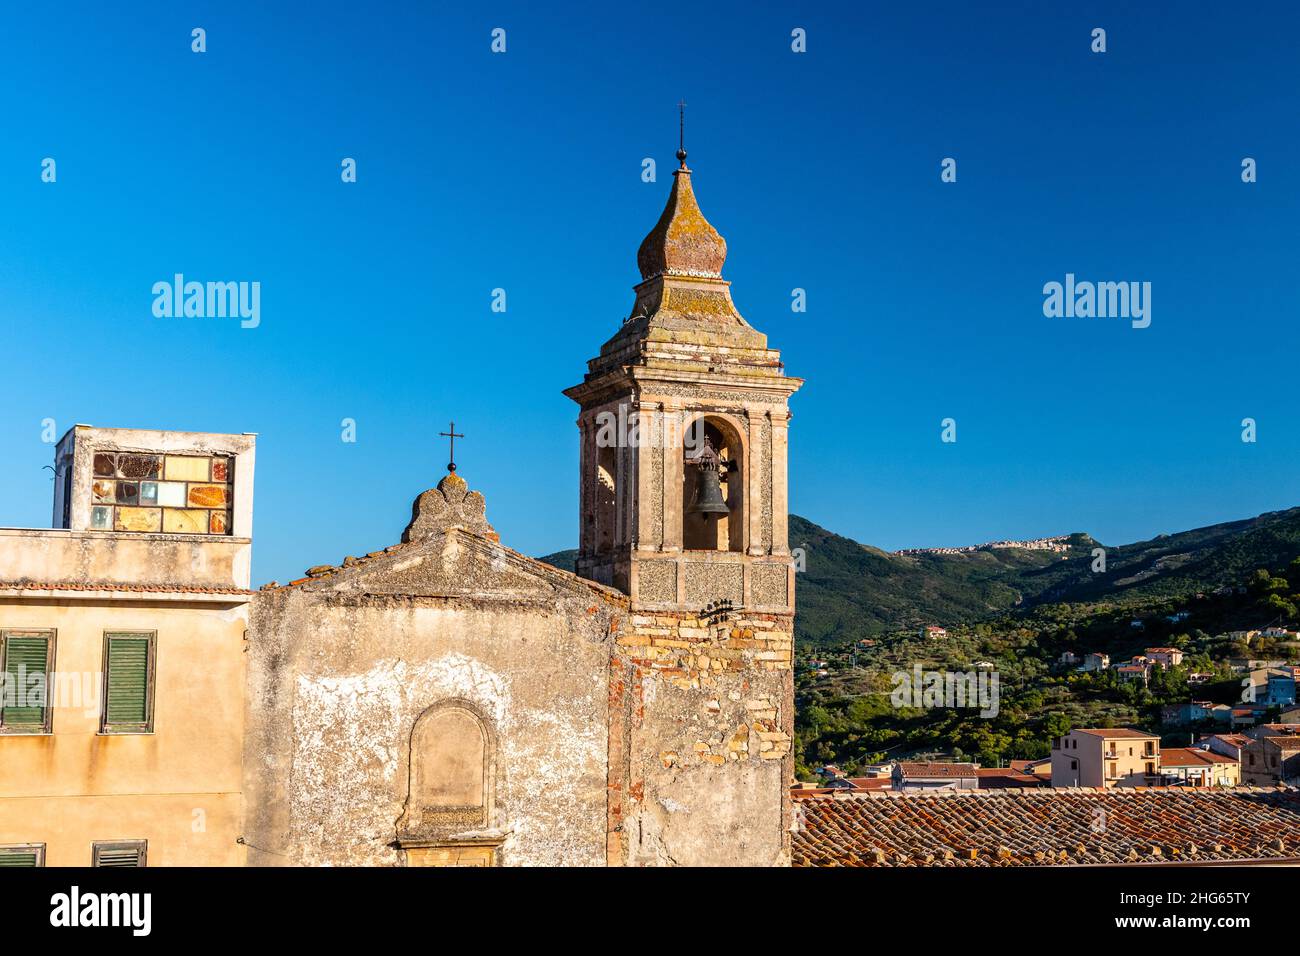 Saint Mary church in castle square. Castelbuono, Madonie mountains, Sicily Stock Photo